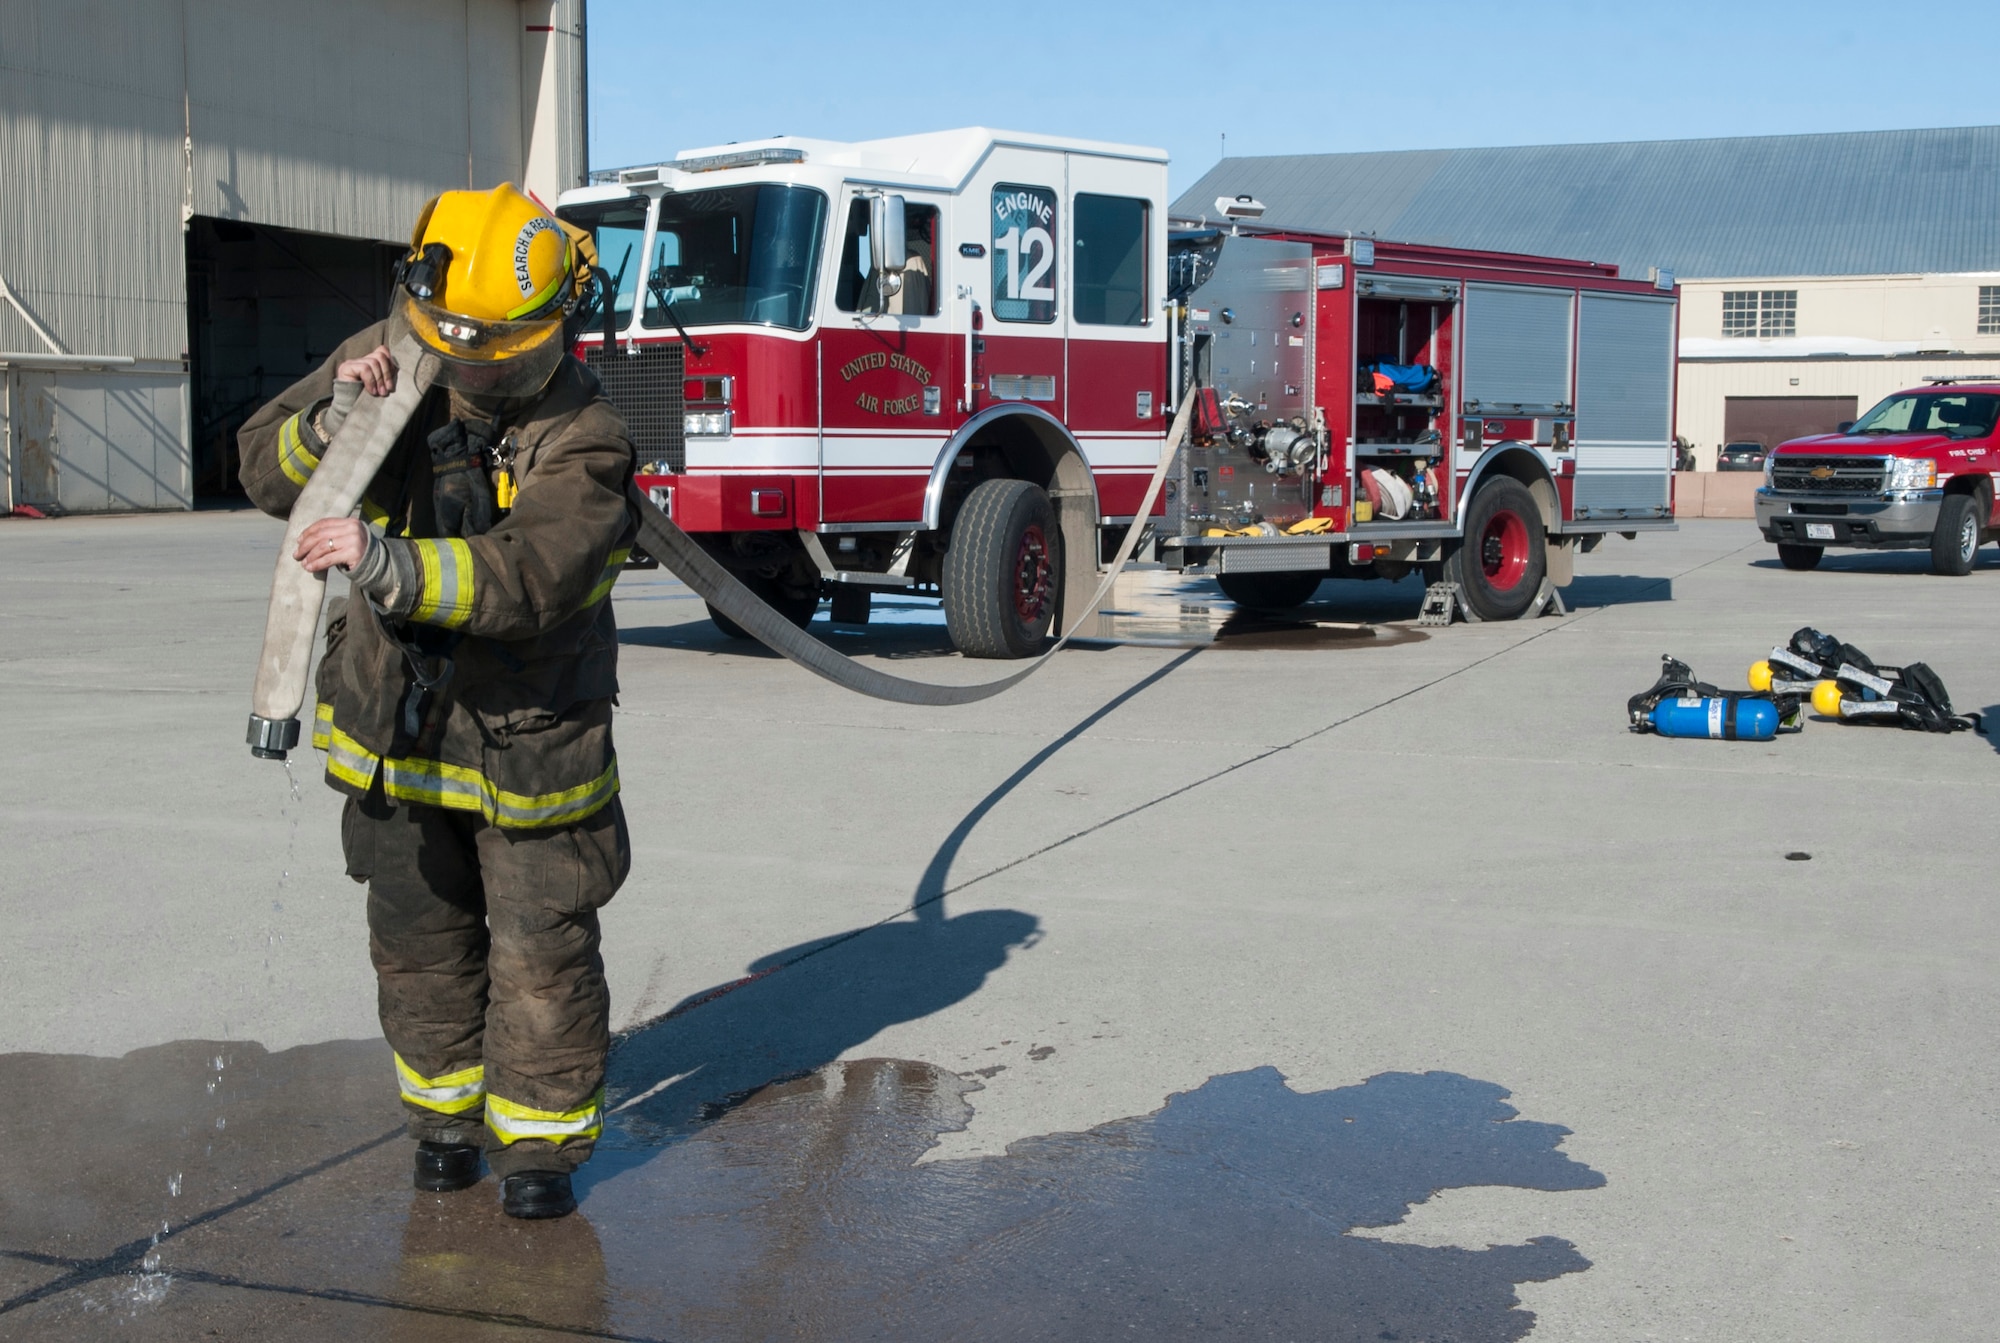 Tim McCartney, North Lemmon Fire Department firefighter, carries a fire hose at Minot Air Force Base, N.D., Feb. 24, 2017. The Minot AFB 5th Civil Engineer Squadron hosted a North Dakota Fire Association training class for mutual aid fire departments. (U.S. Air Force photo/Airman 1st Class Jonathan McElderry)